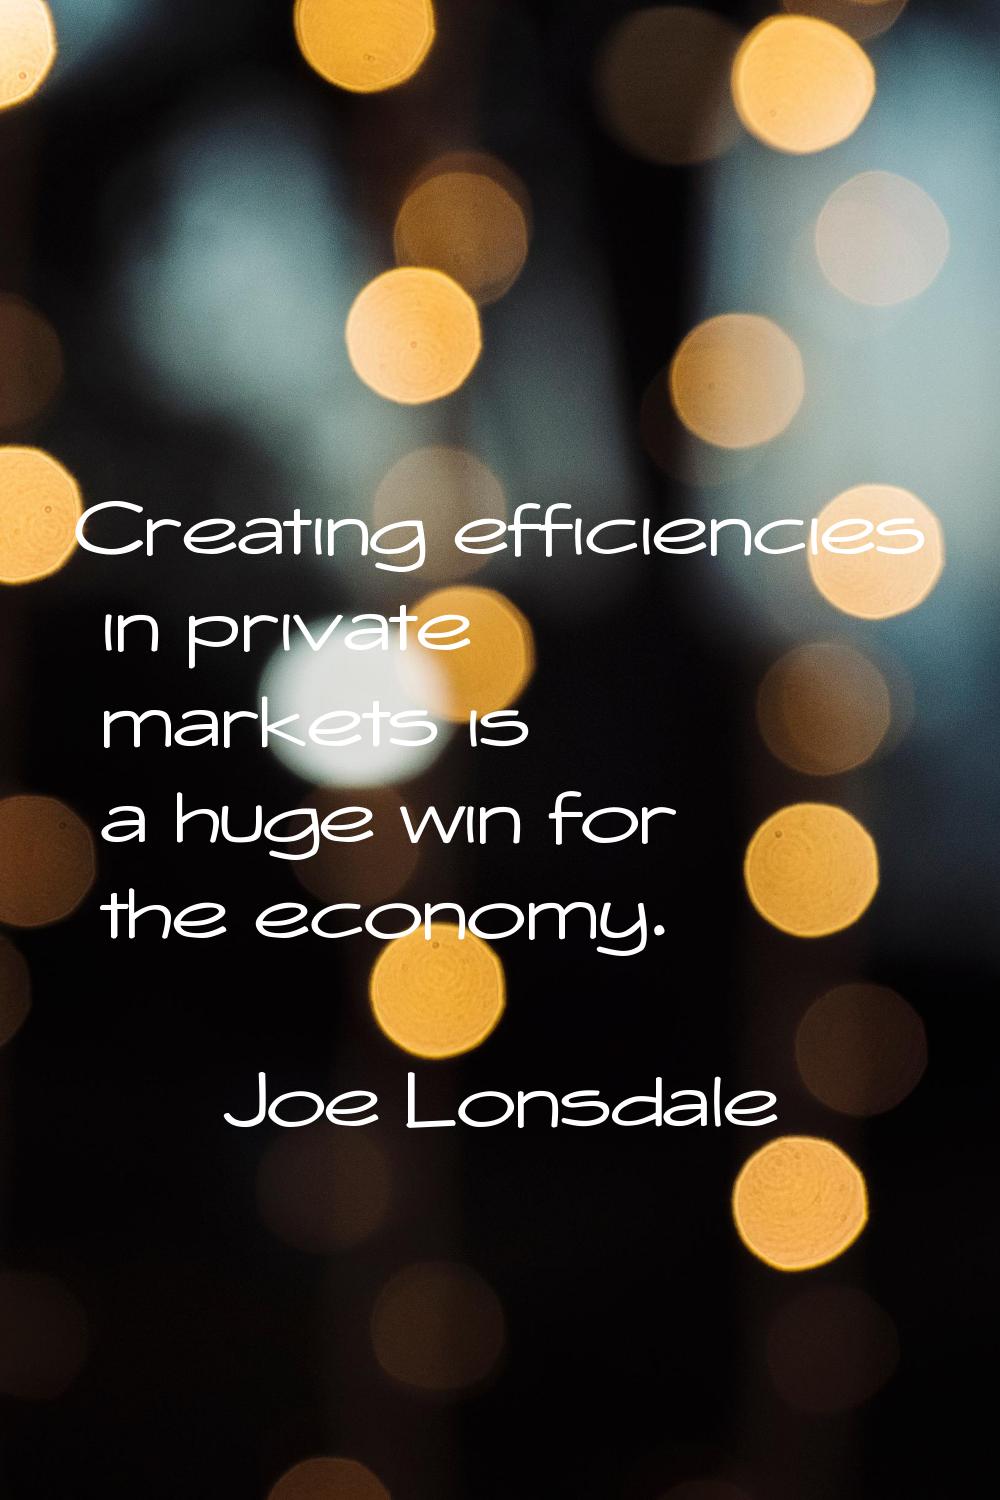 Creating efficiencies in private markets is a huge win for the economy.